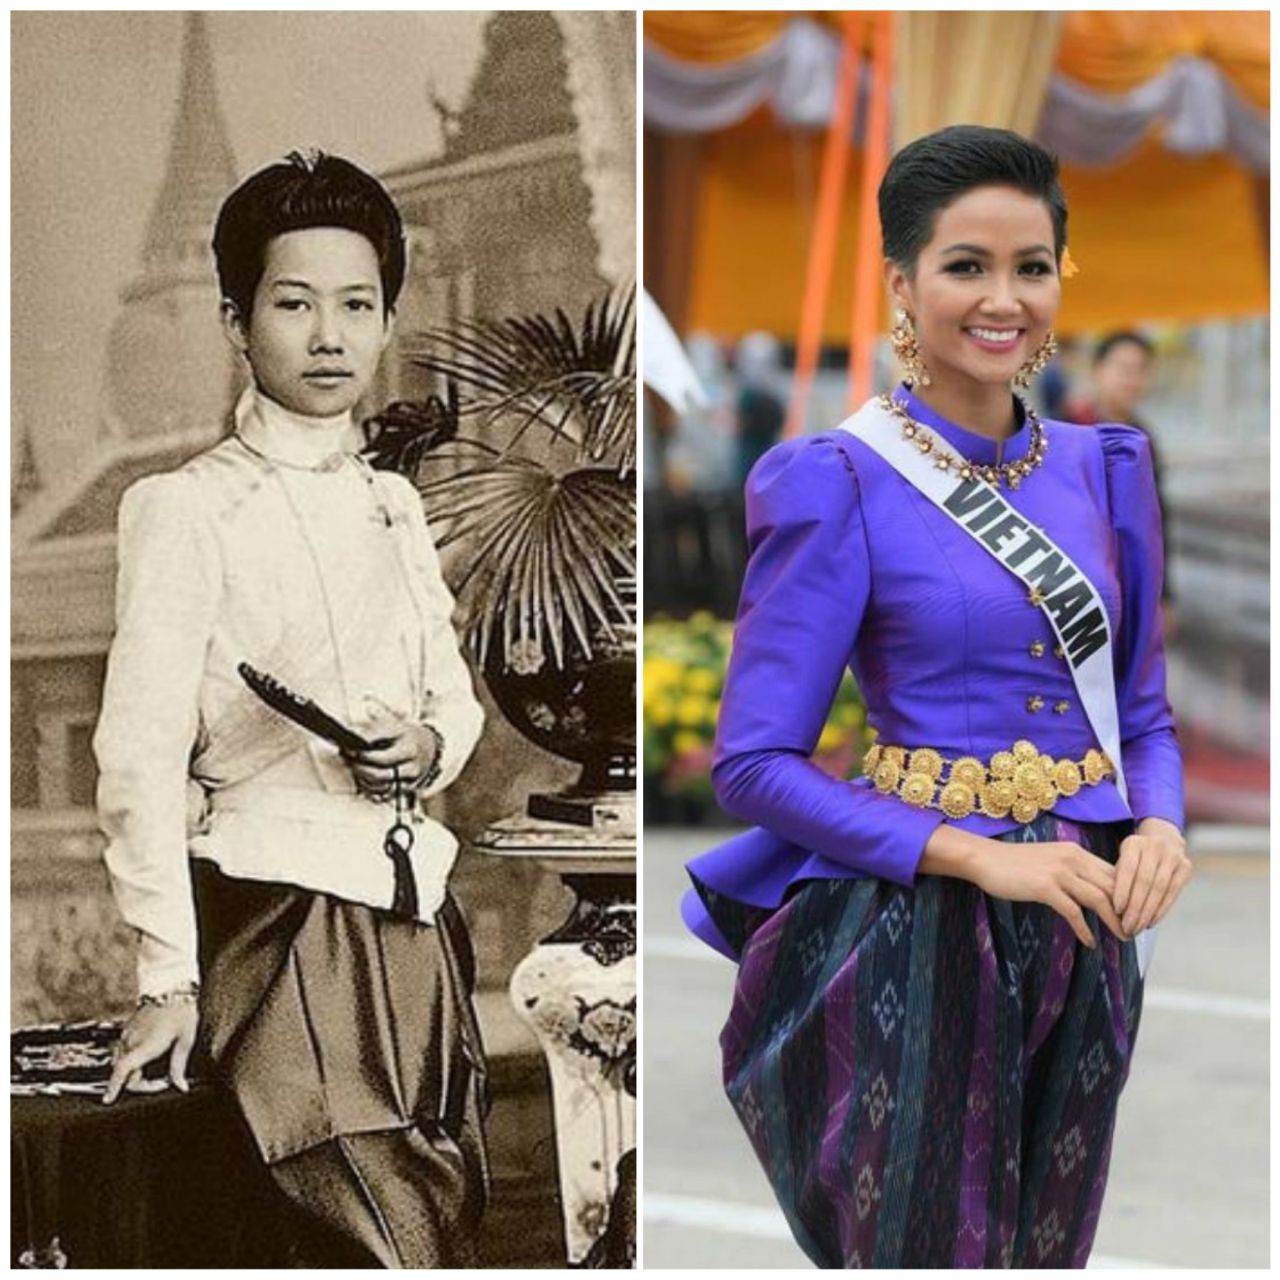 Thailand 🇹🇭:Thai style in the region of King Rama V, mixed fashion of Victorian style and Thai traditional.